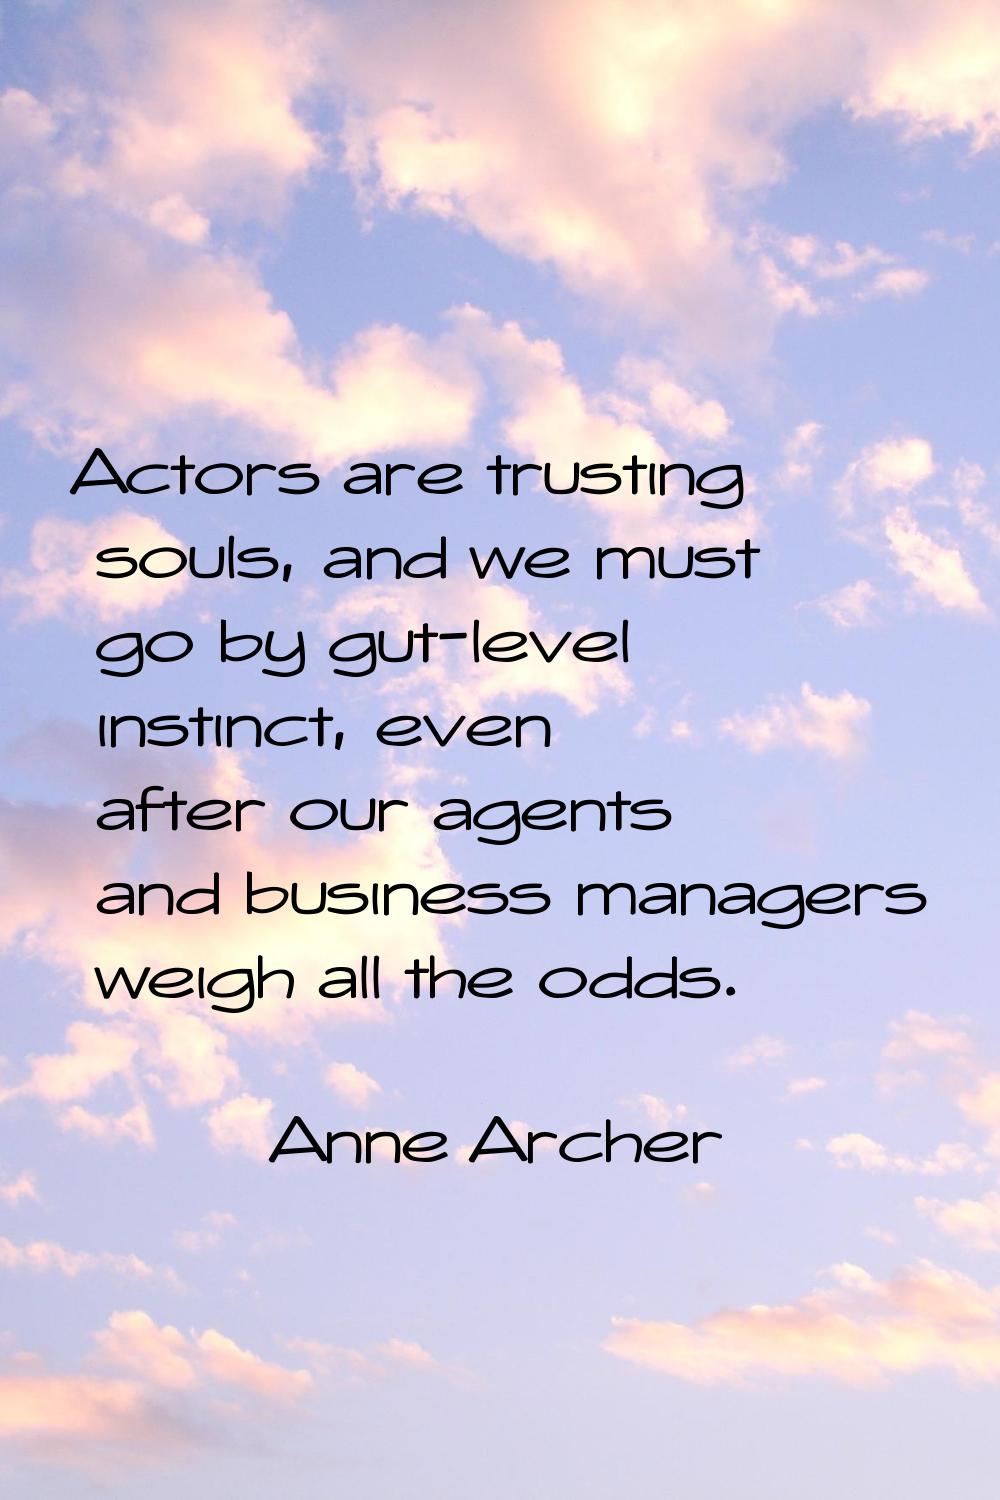 Actors are trusting souls, and we must go by gut-level instinct, even after our agents and business